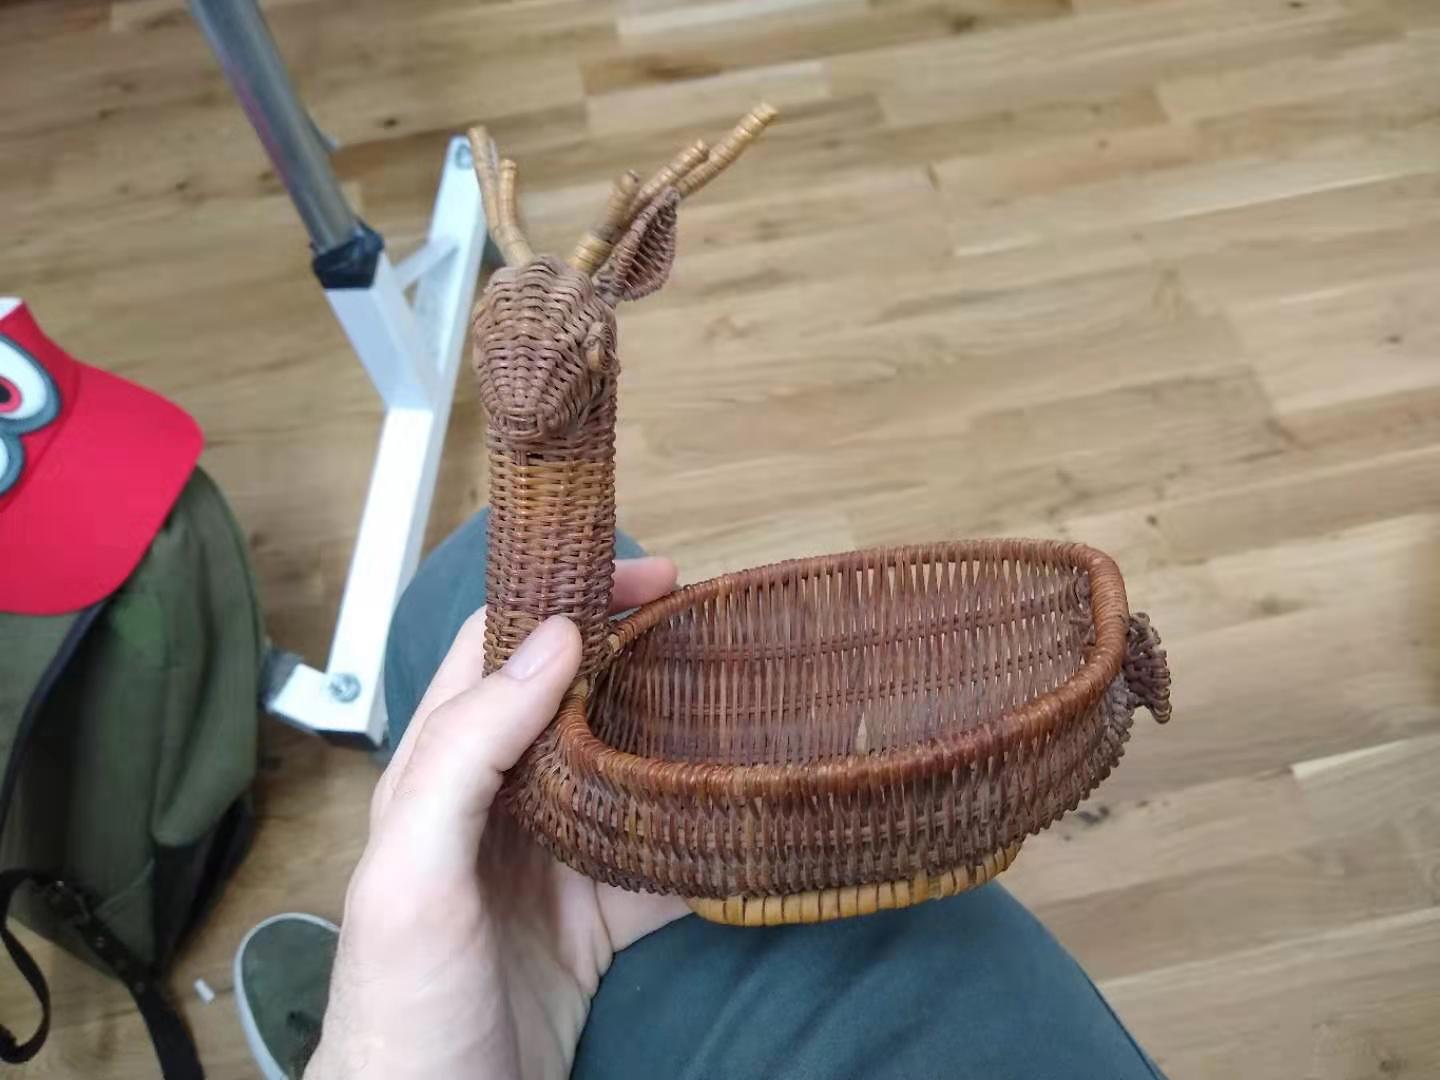 A wicker deer with one eye and ear missing.